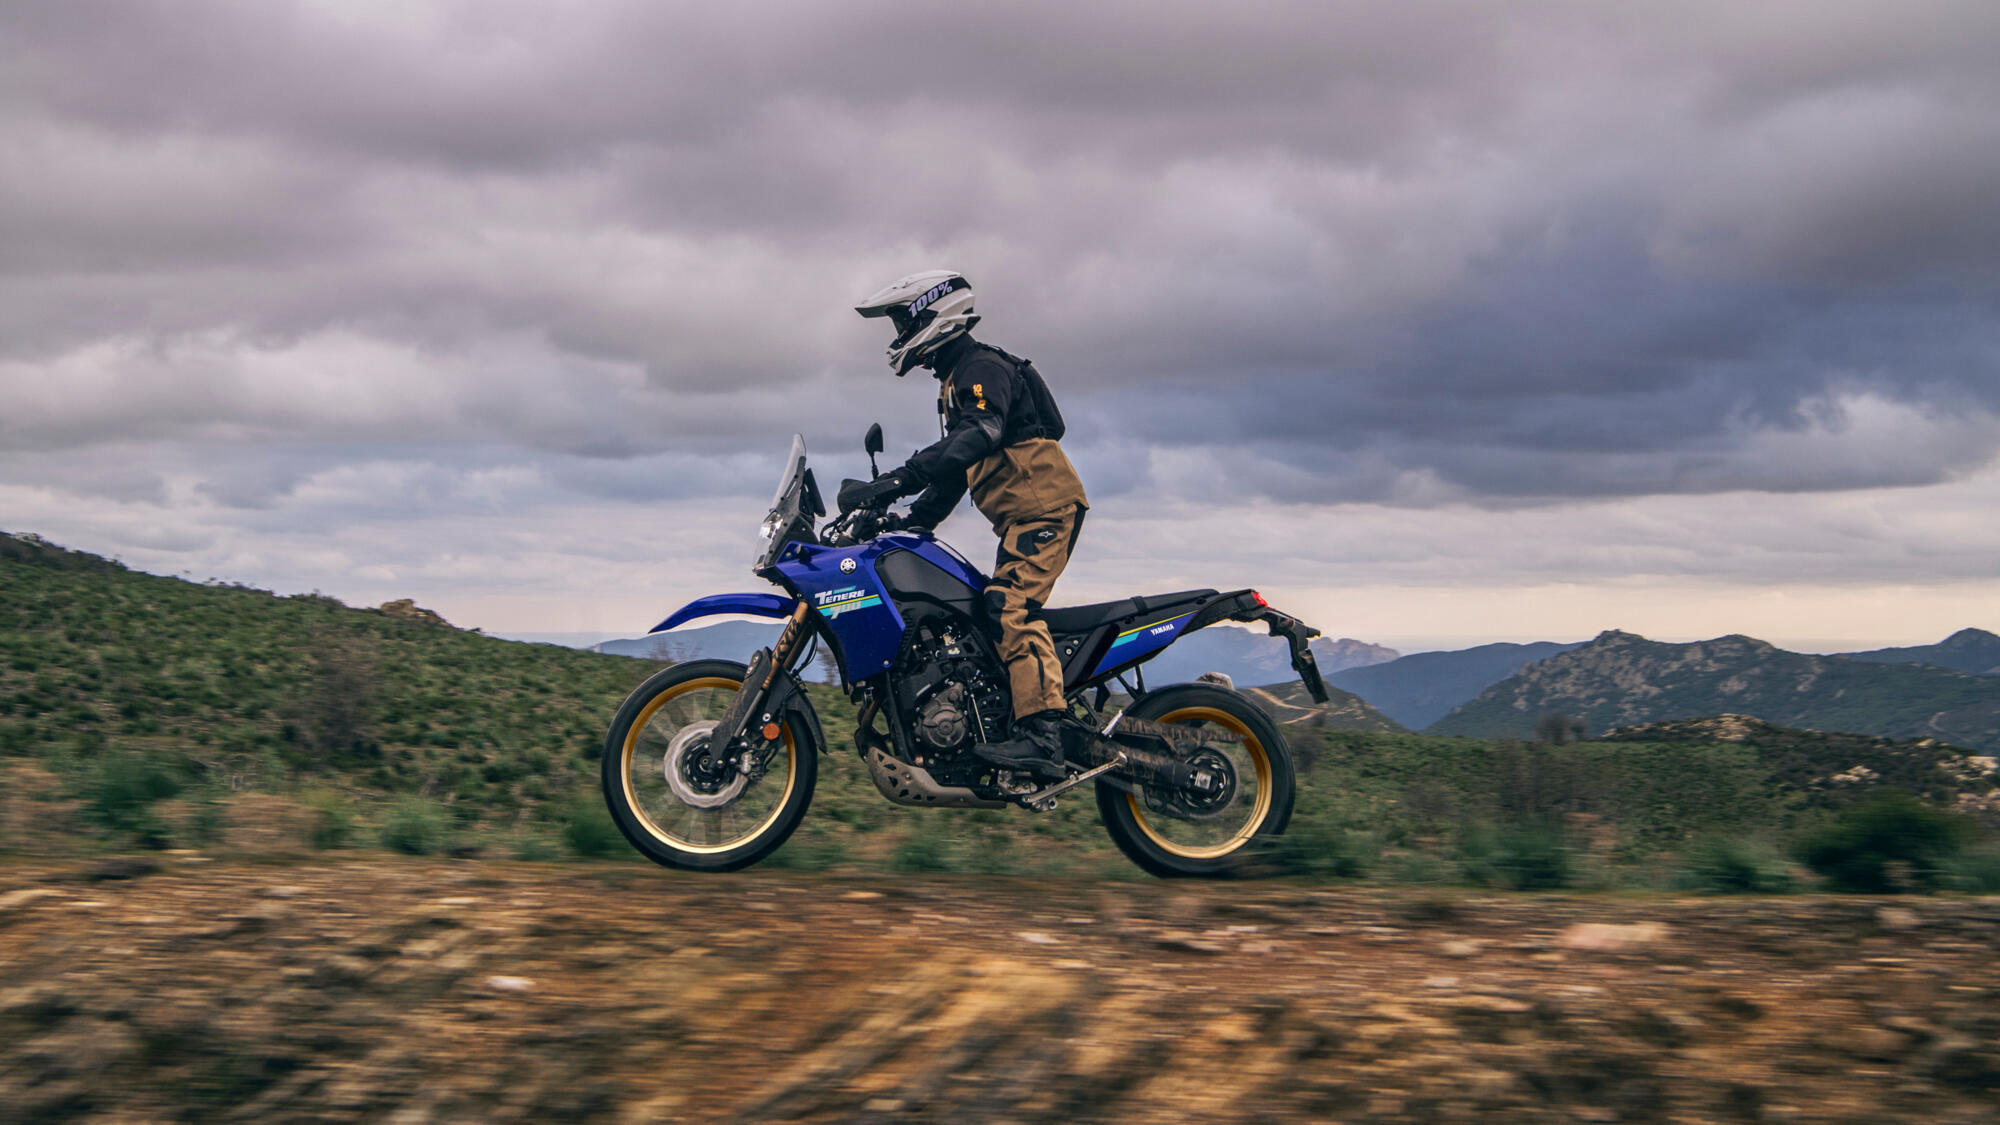 A view of the all-new 2024 Yamaha Ténéré 700 Extreme, to be debuted on October 20th. All media provided by Yamaha Motors Europe.